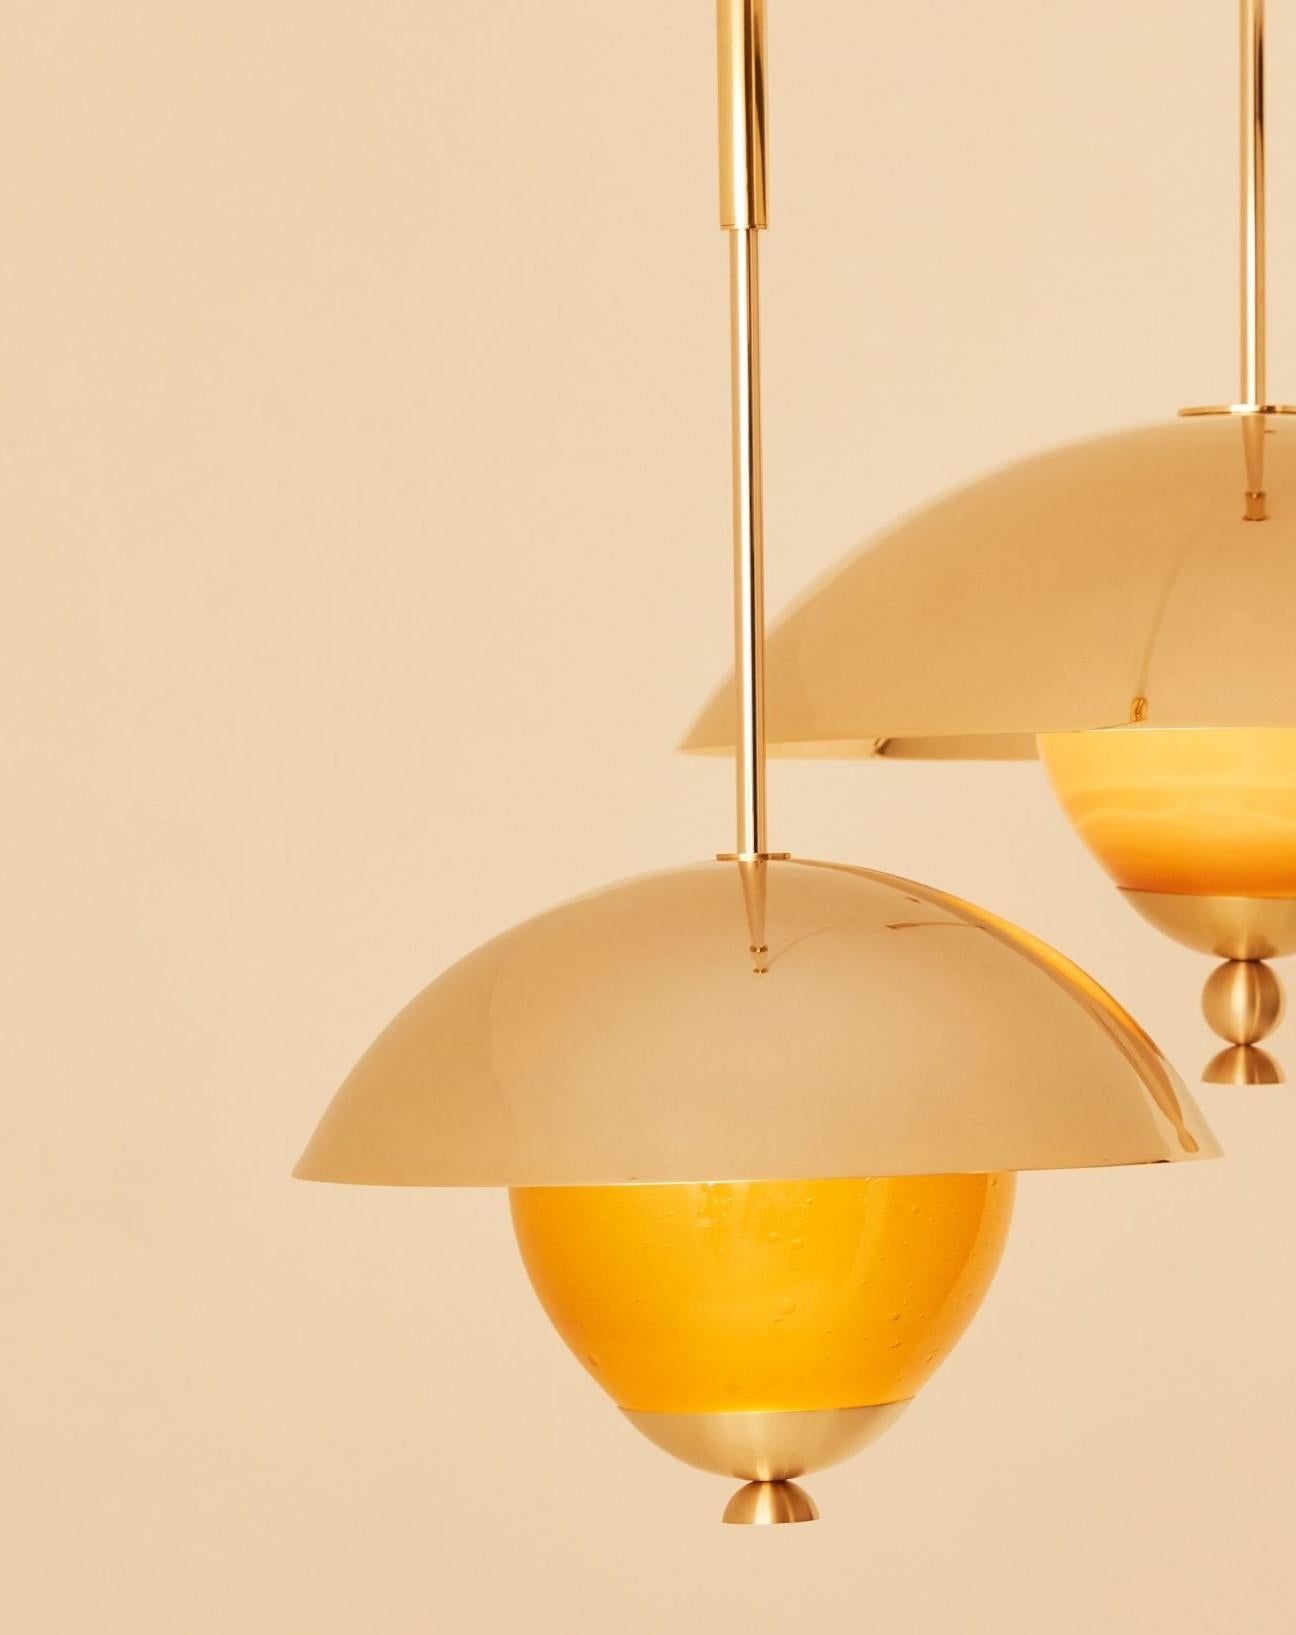 Small Céleste pendant light by Mydriaz.
Dimensions: S: diameter 40 x prof 28 cm
 Also available L: diameter 60 x prof 34 cm
Materials: Brass and glass
Finishes: Golden-plated polished brass, White nickel finish on polished brass, black nickel